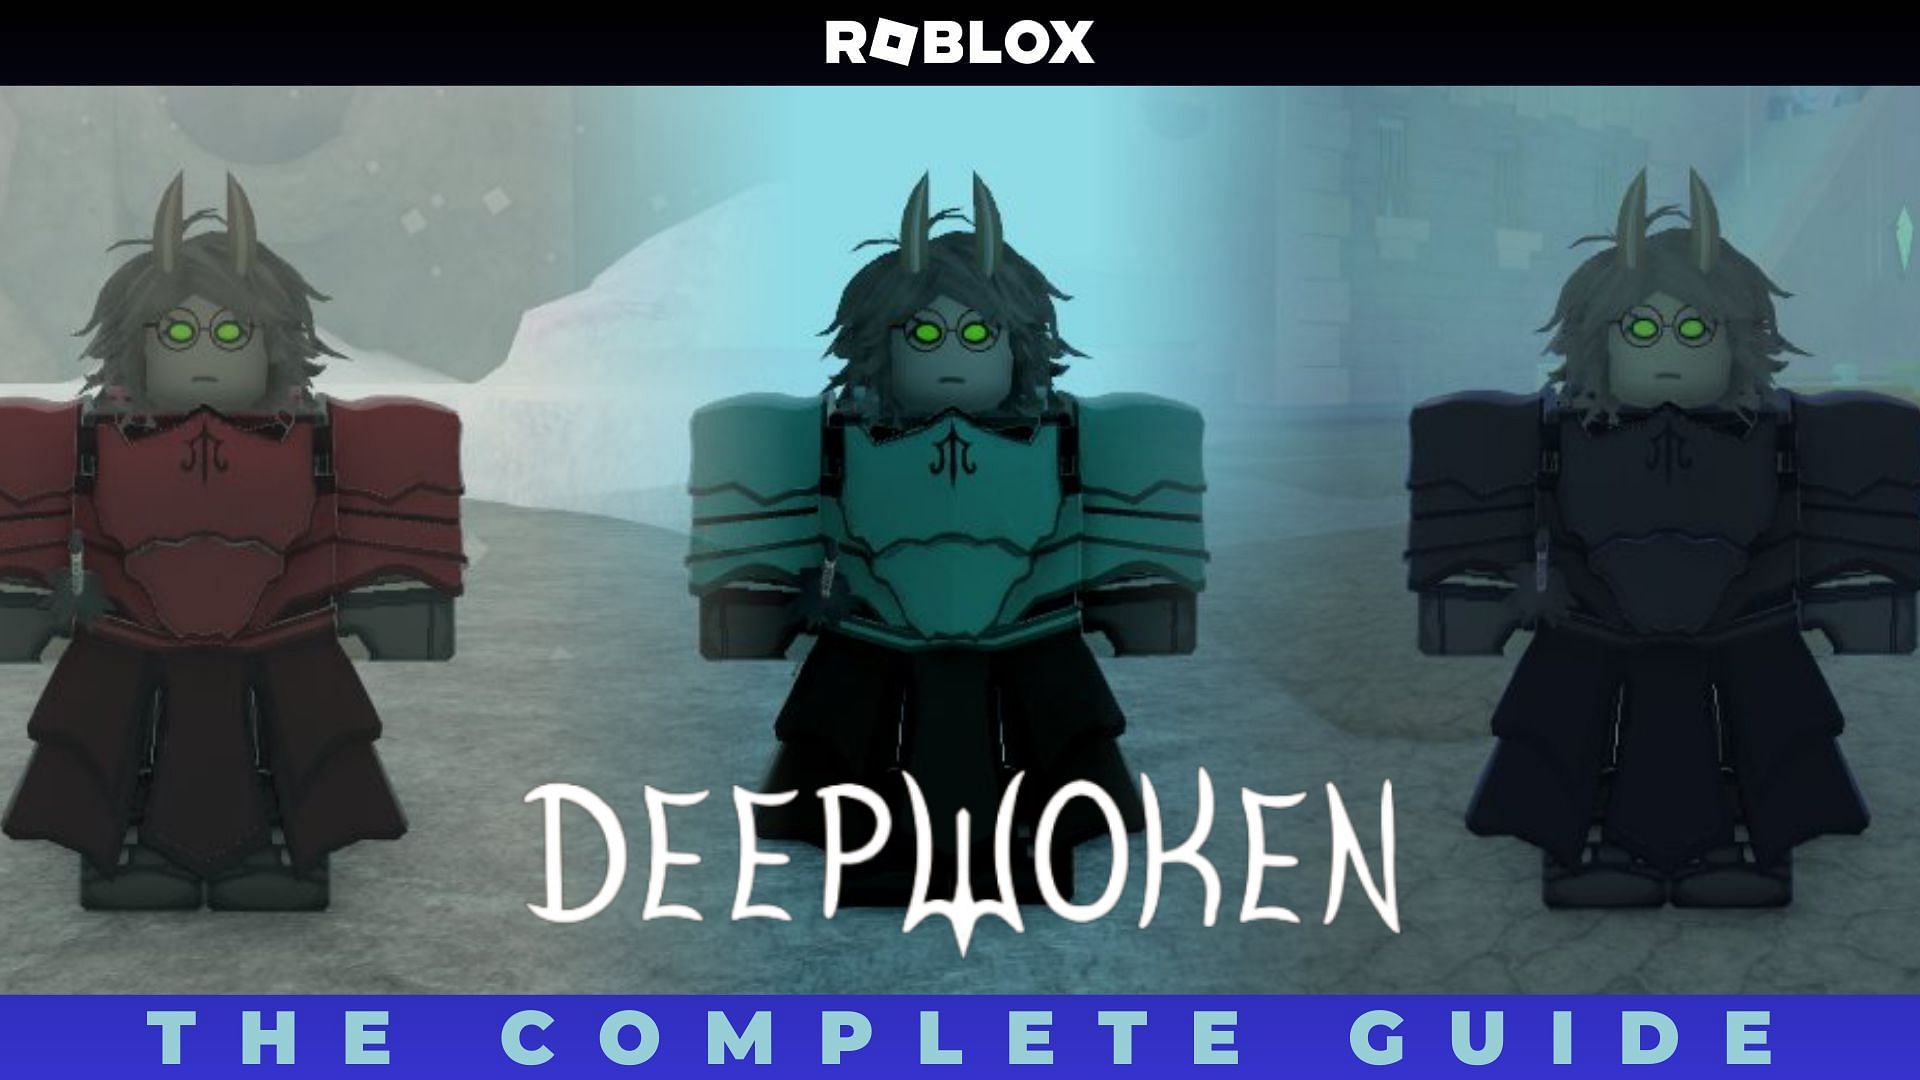 since I've been seeing a few posts about roblox games: deepwoken